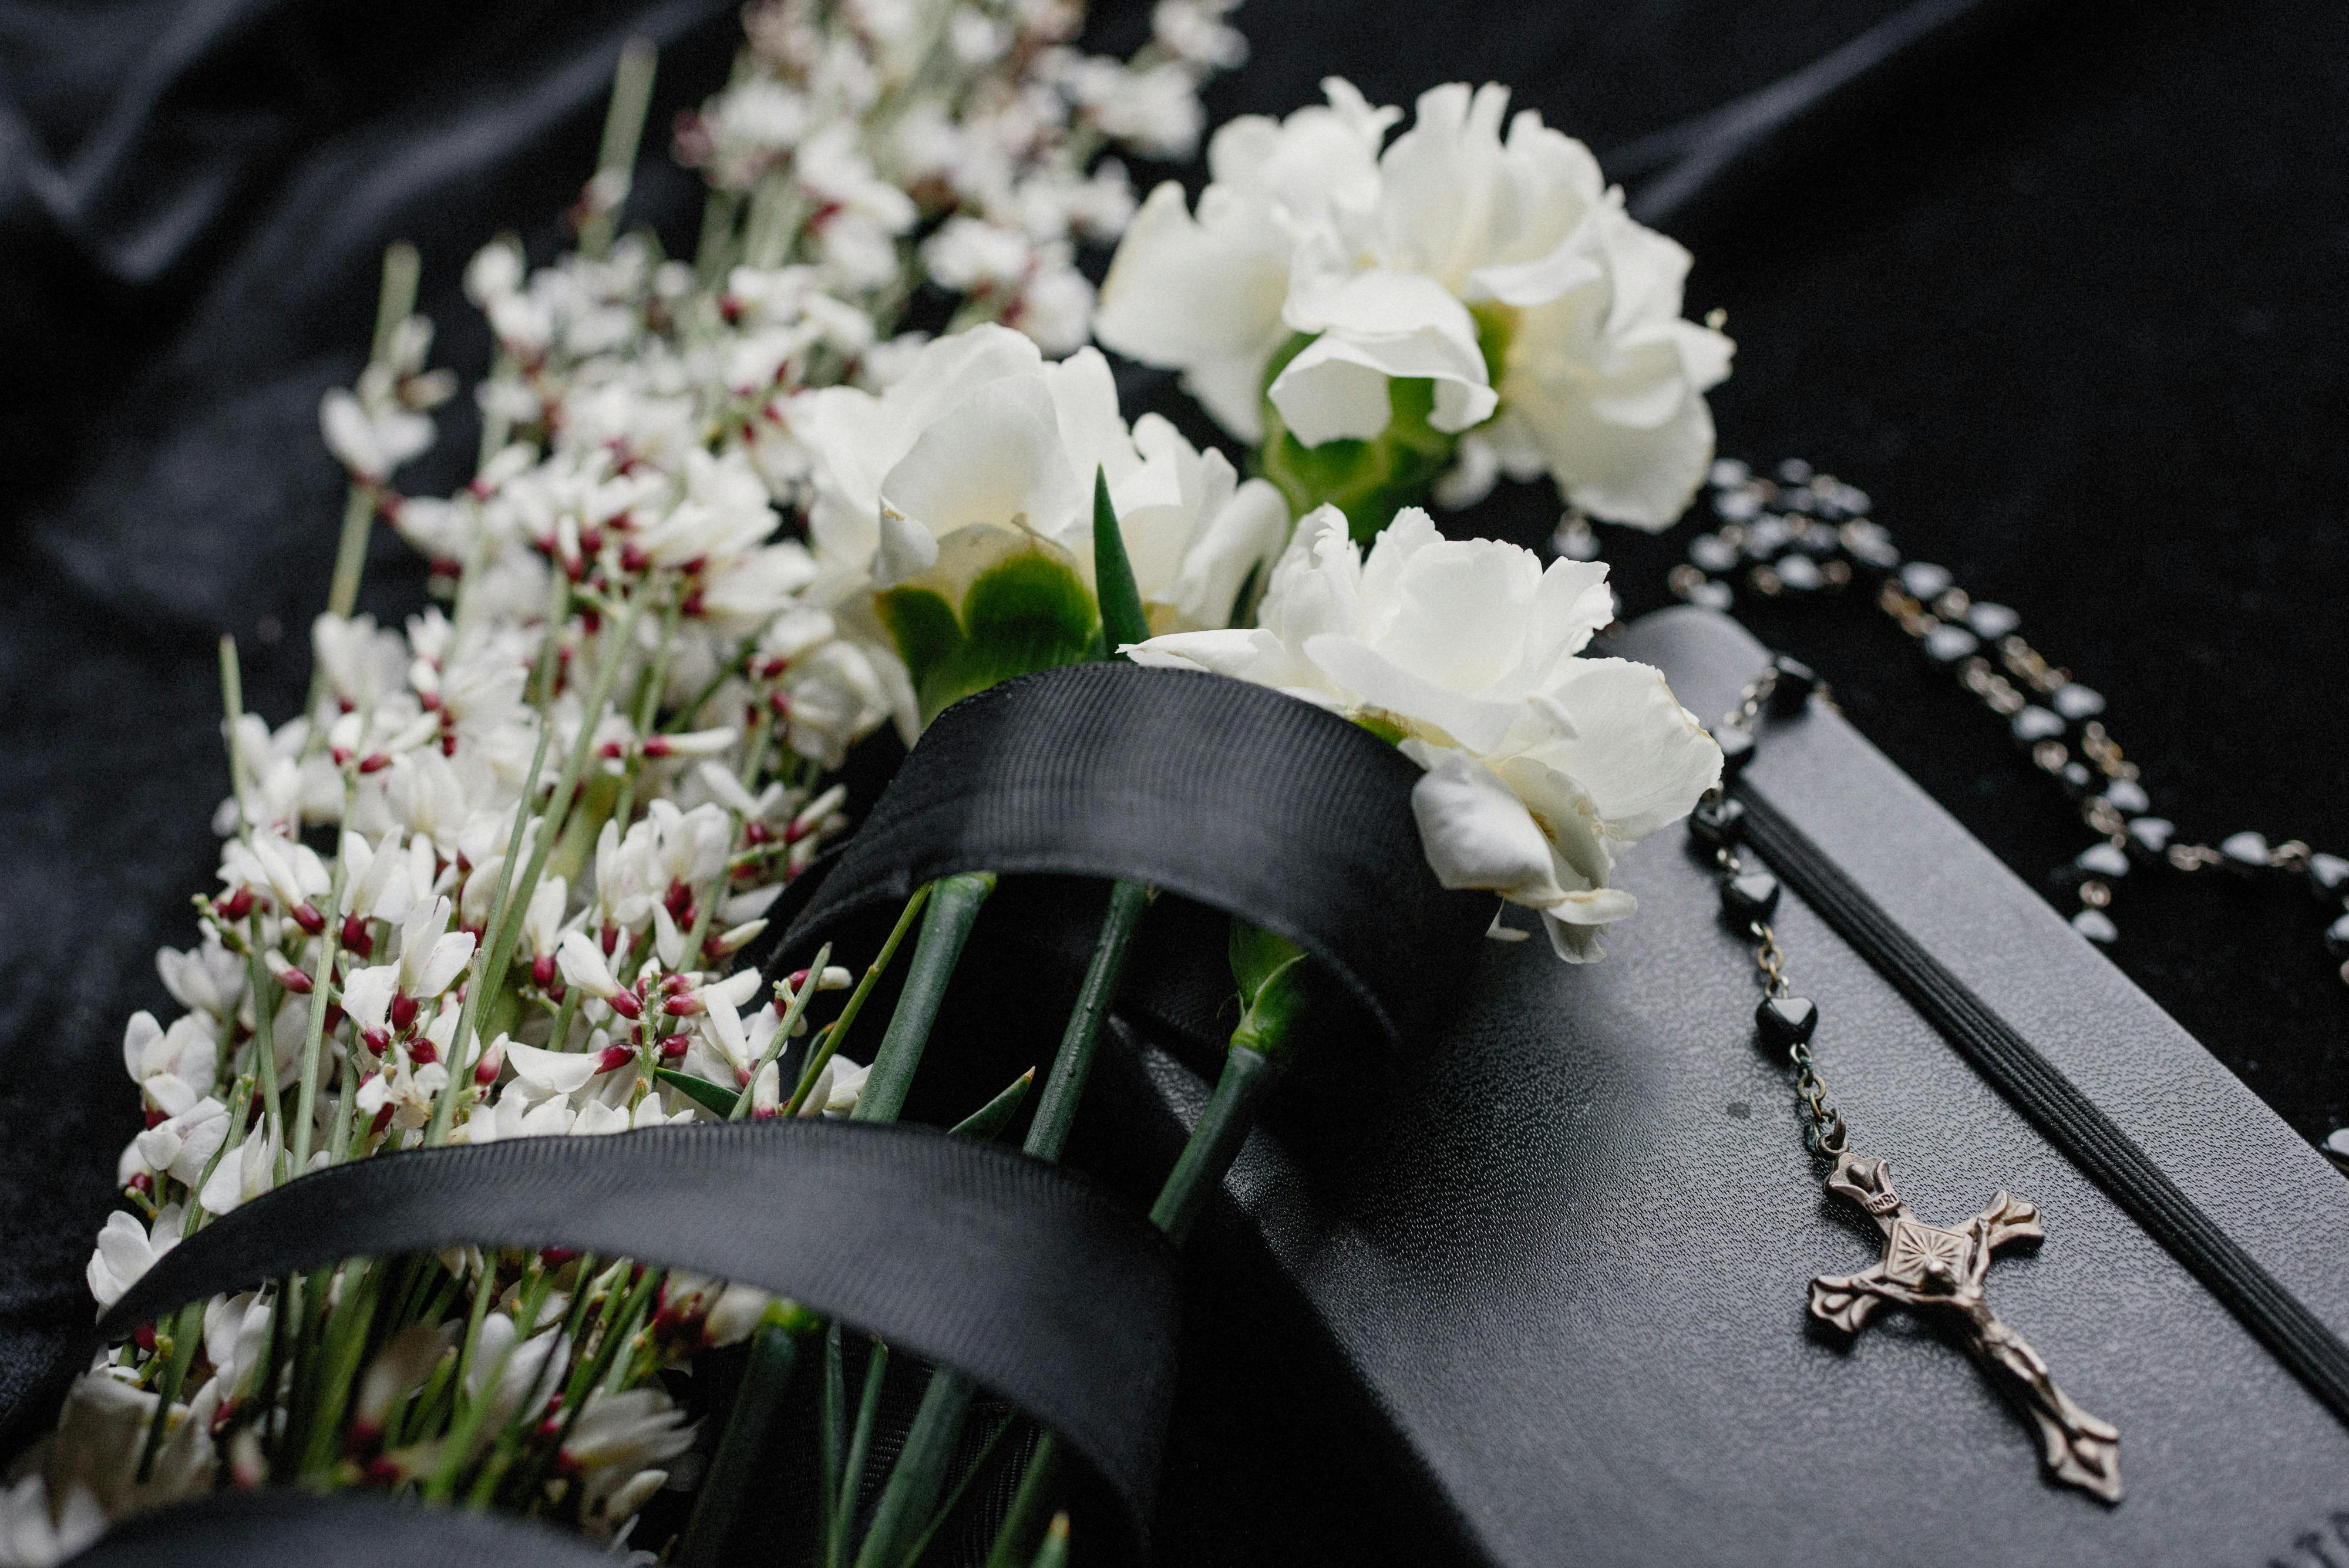 Funeral Background Photos, Download The BEST Free Funeral Background Stock  Photos & HD Images